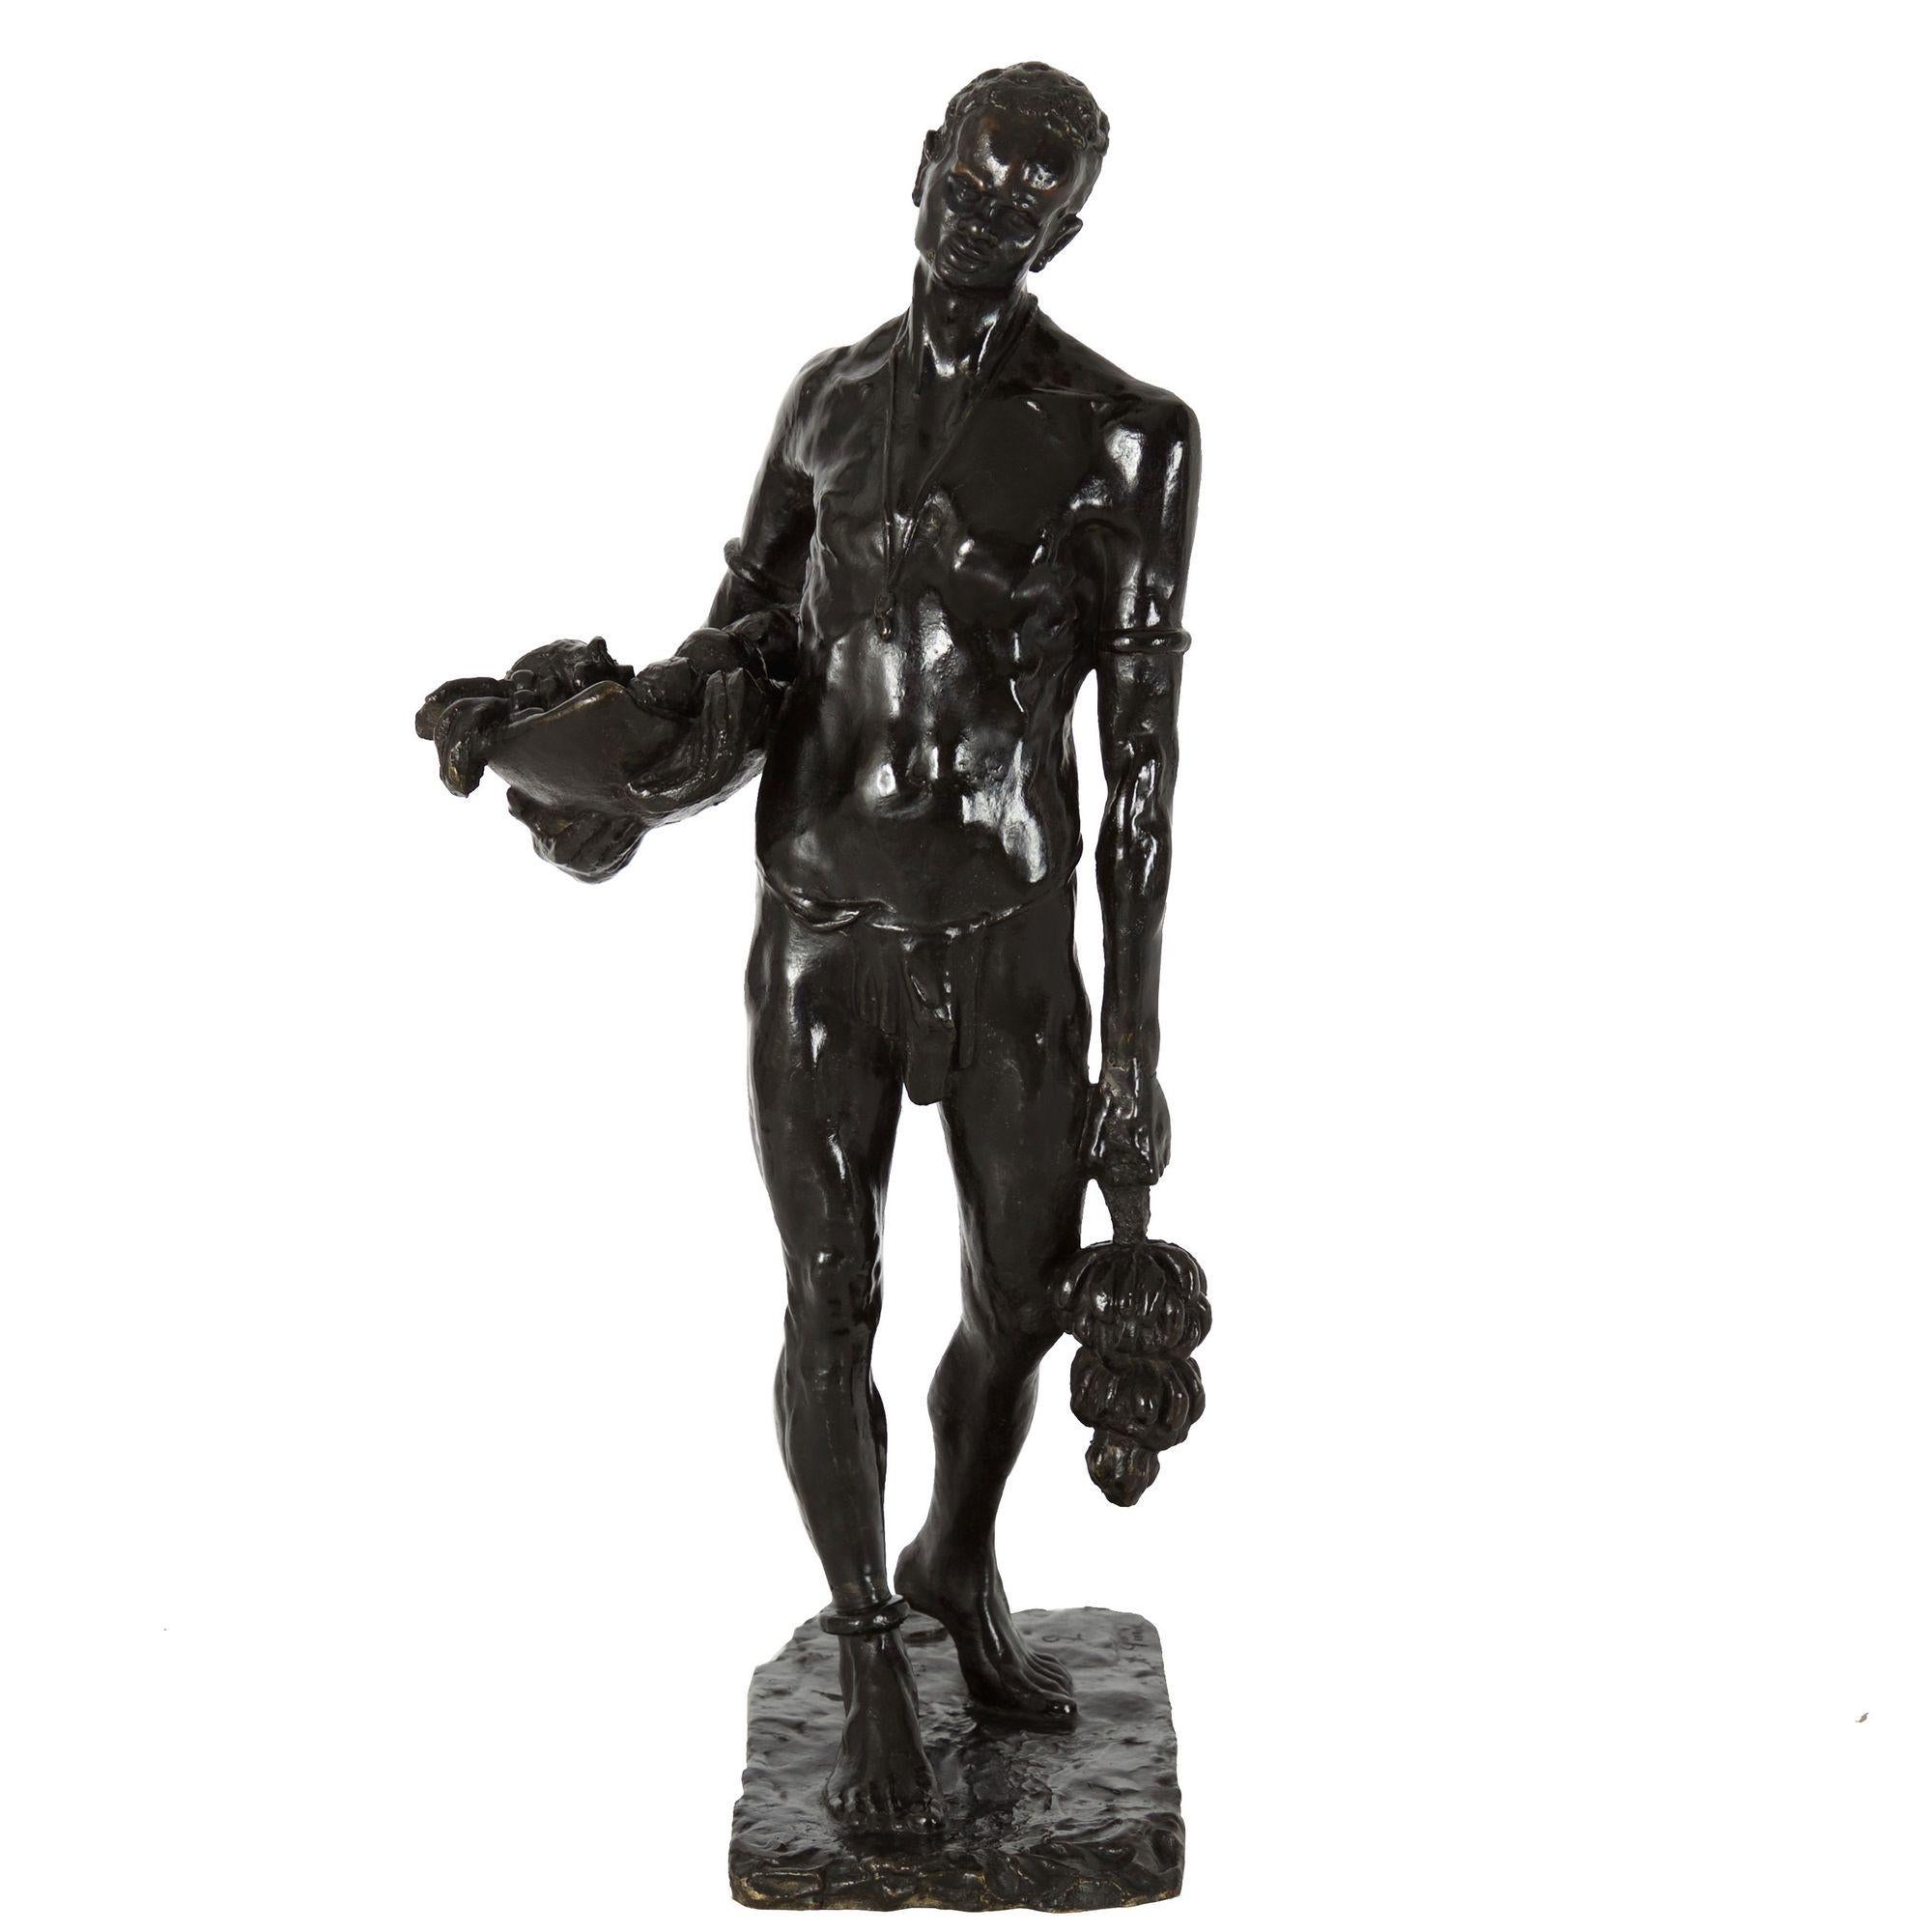 A fine modernist casting using the lost-wax method in bronze, Le Porteur de Fruits is striking for its lack of refinement; where the bronze poured into the md was left with clear intentionality exactly as it coed with no intervention from the